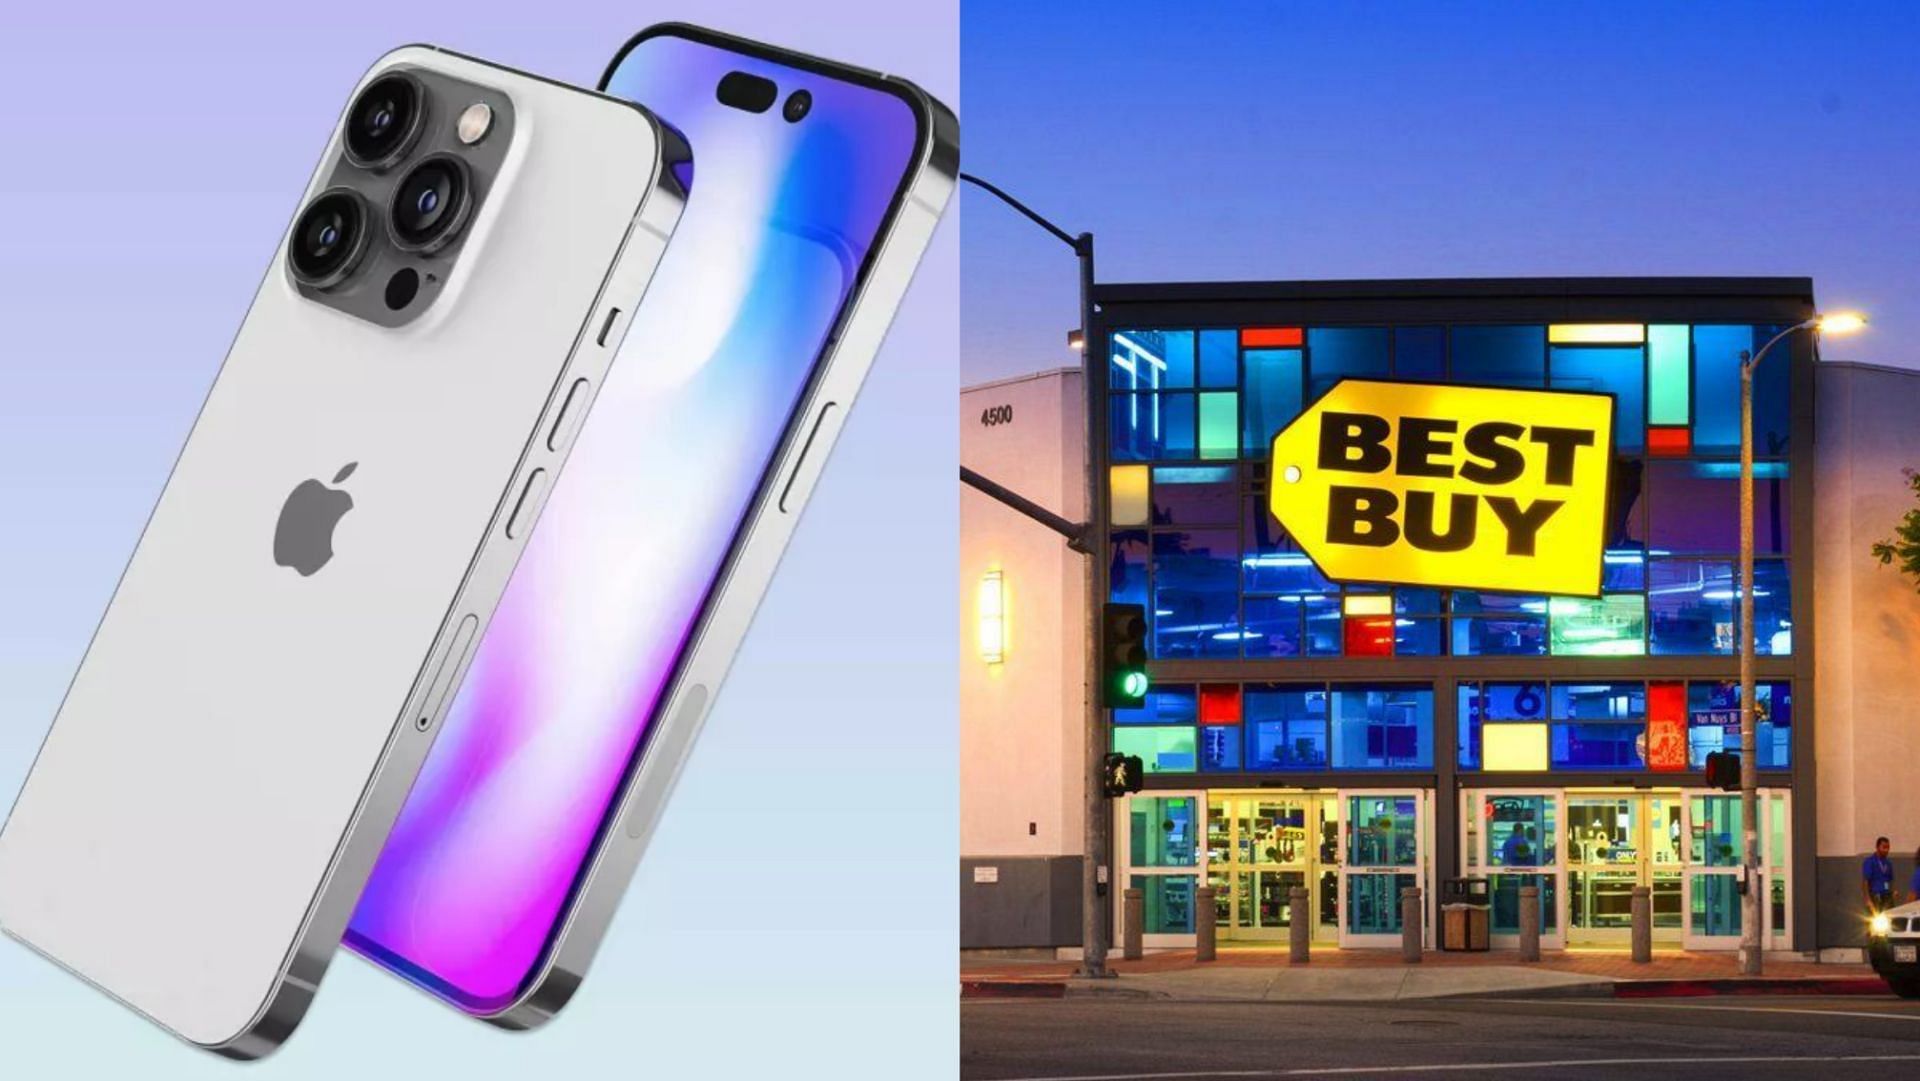 There are some amazing deals on Apple products at Best Buy (Images via Apple, Qwintry)